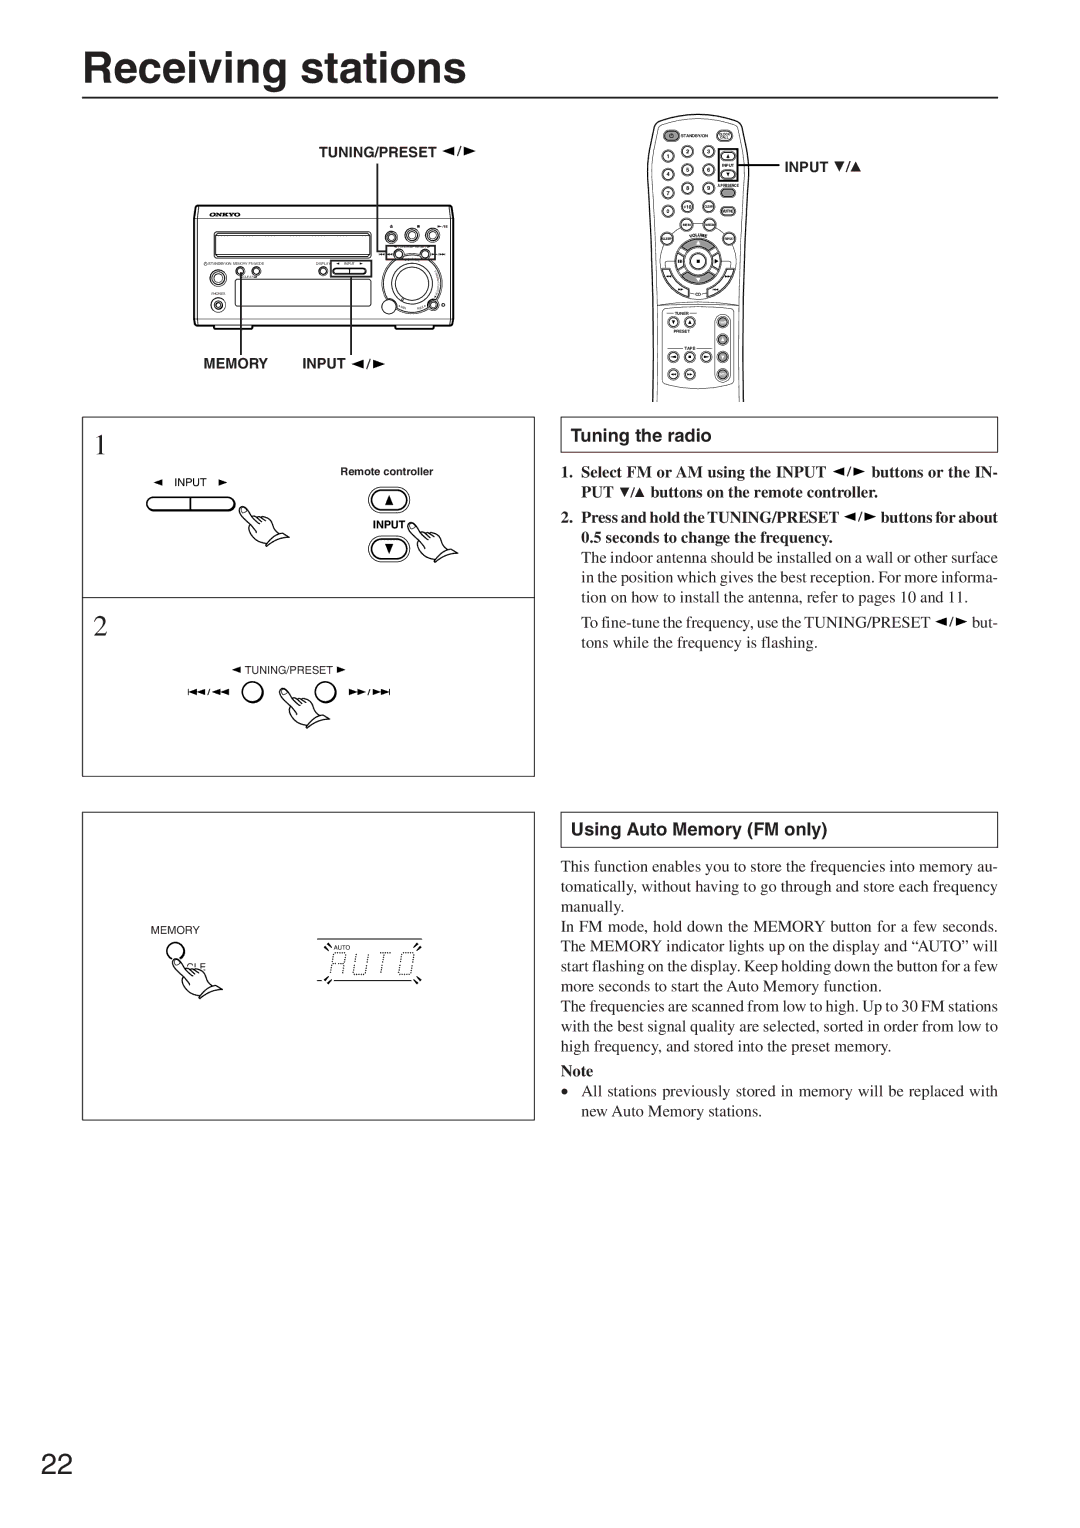 Onkyo CR-305FX instruction manual Receiving stations, Tuning the radio, Using Auto Memory FM only 